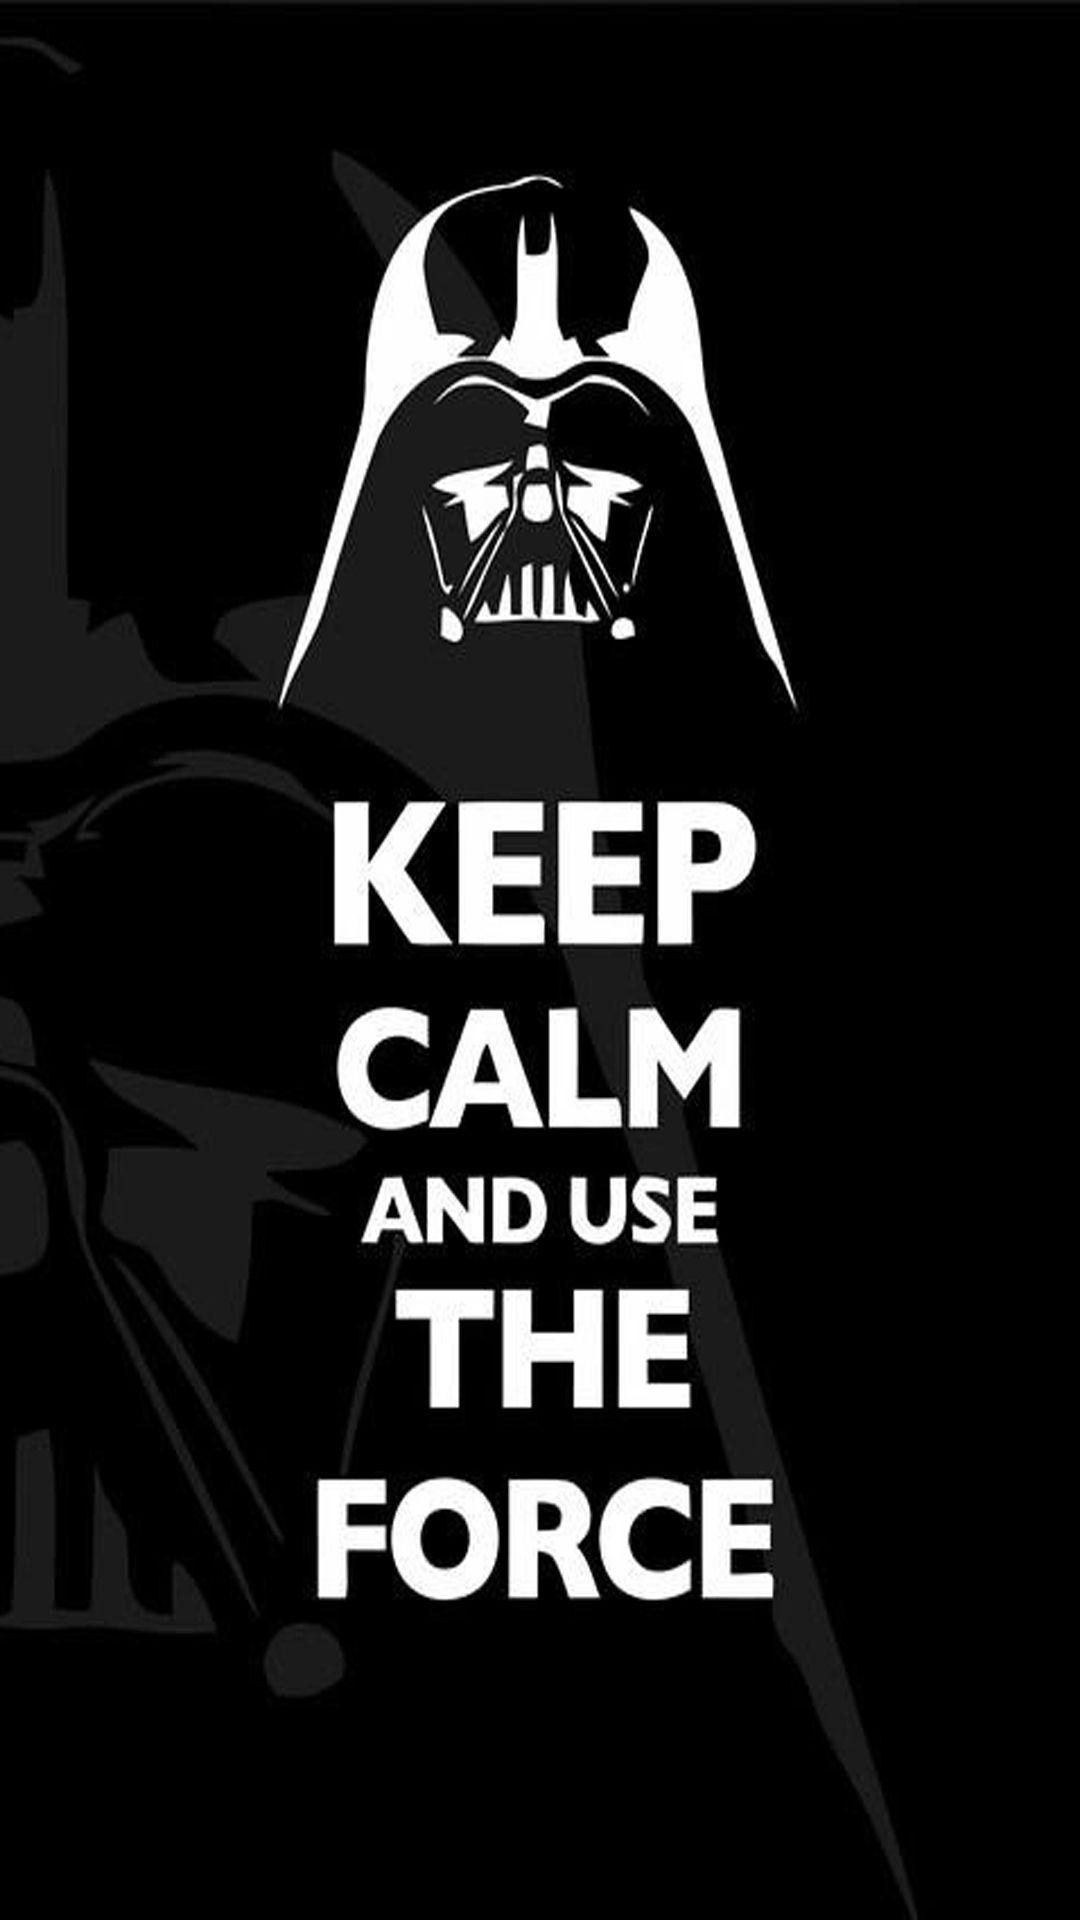 Keep Calm And Use The Force iPhone 6 Plus Wallpaper (1080x1920)